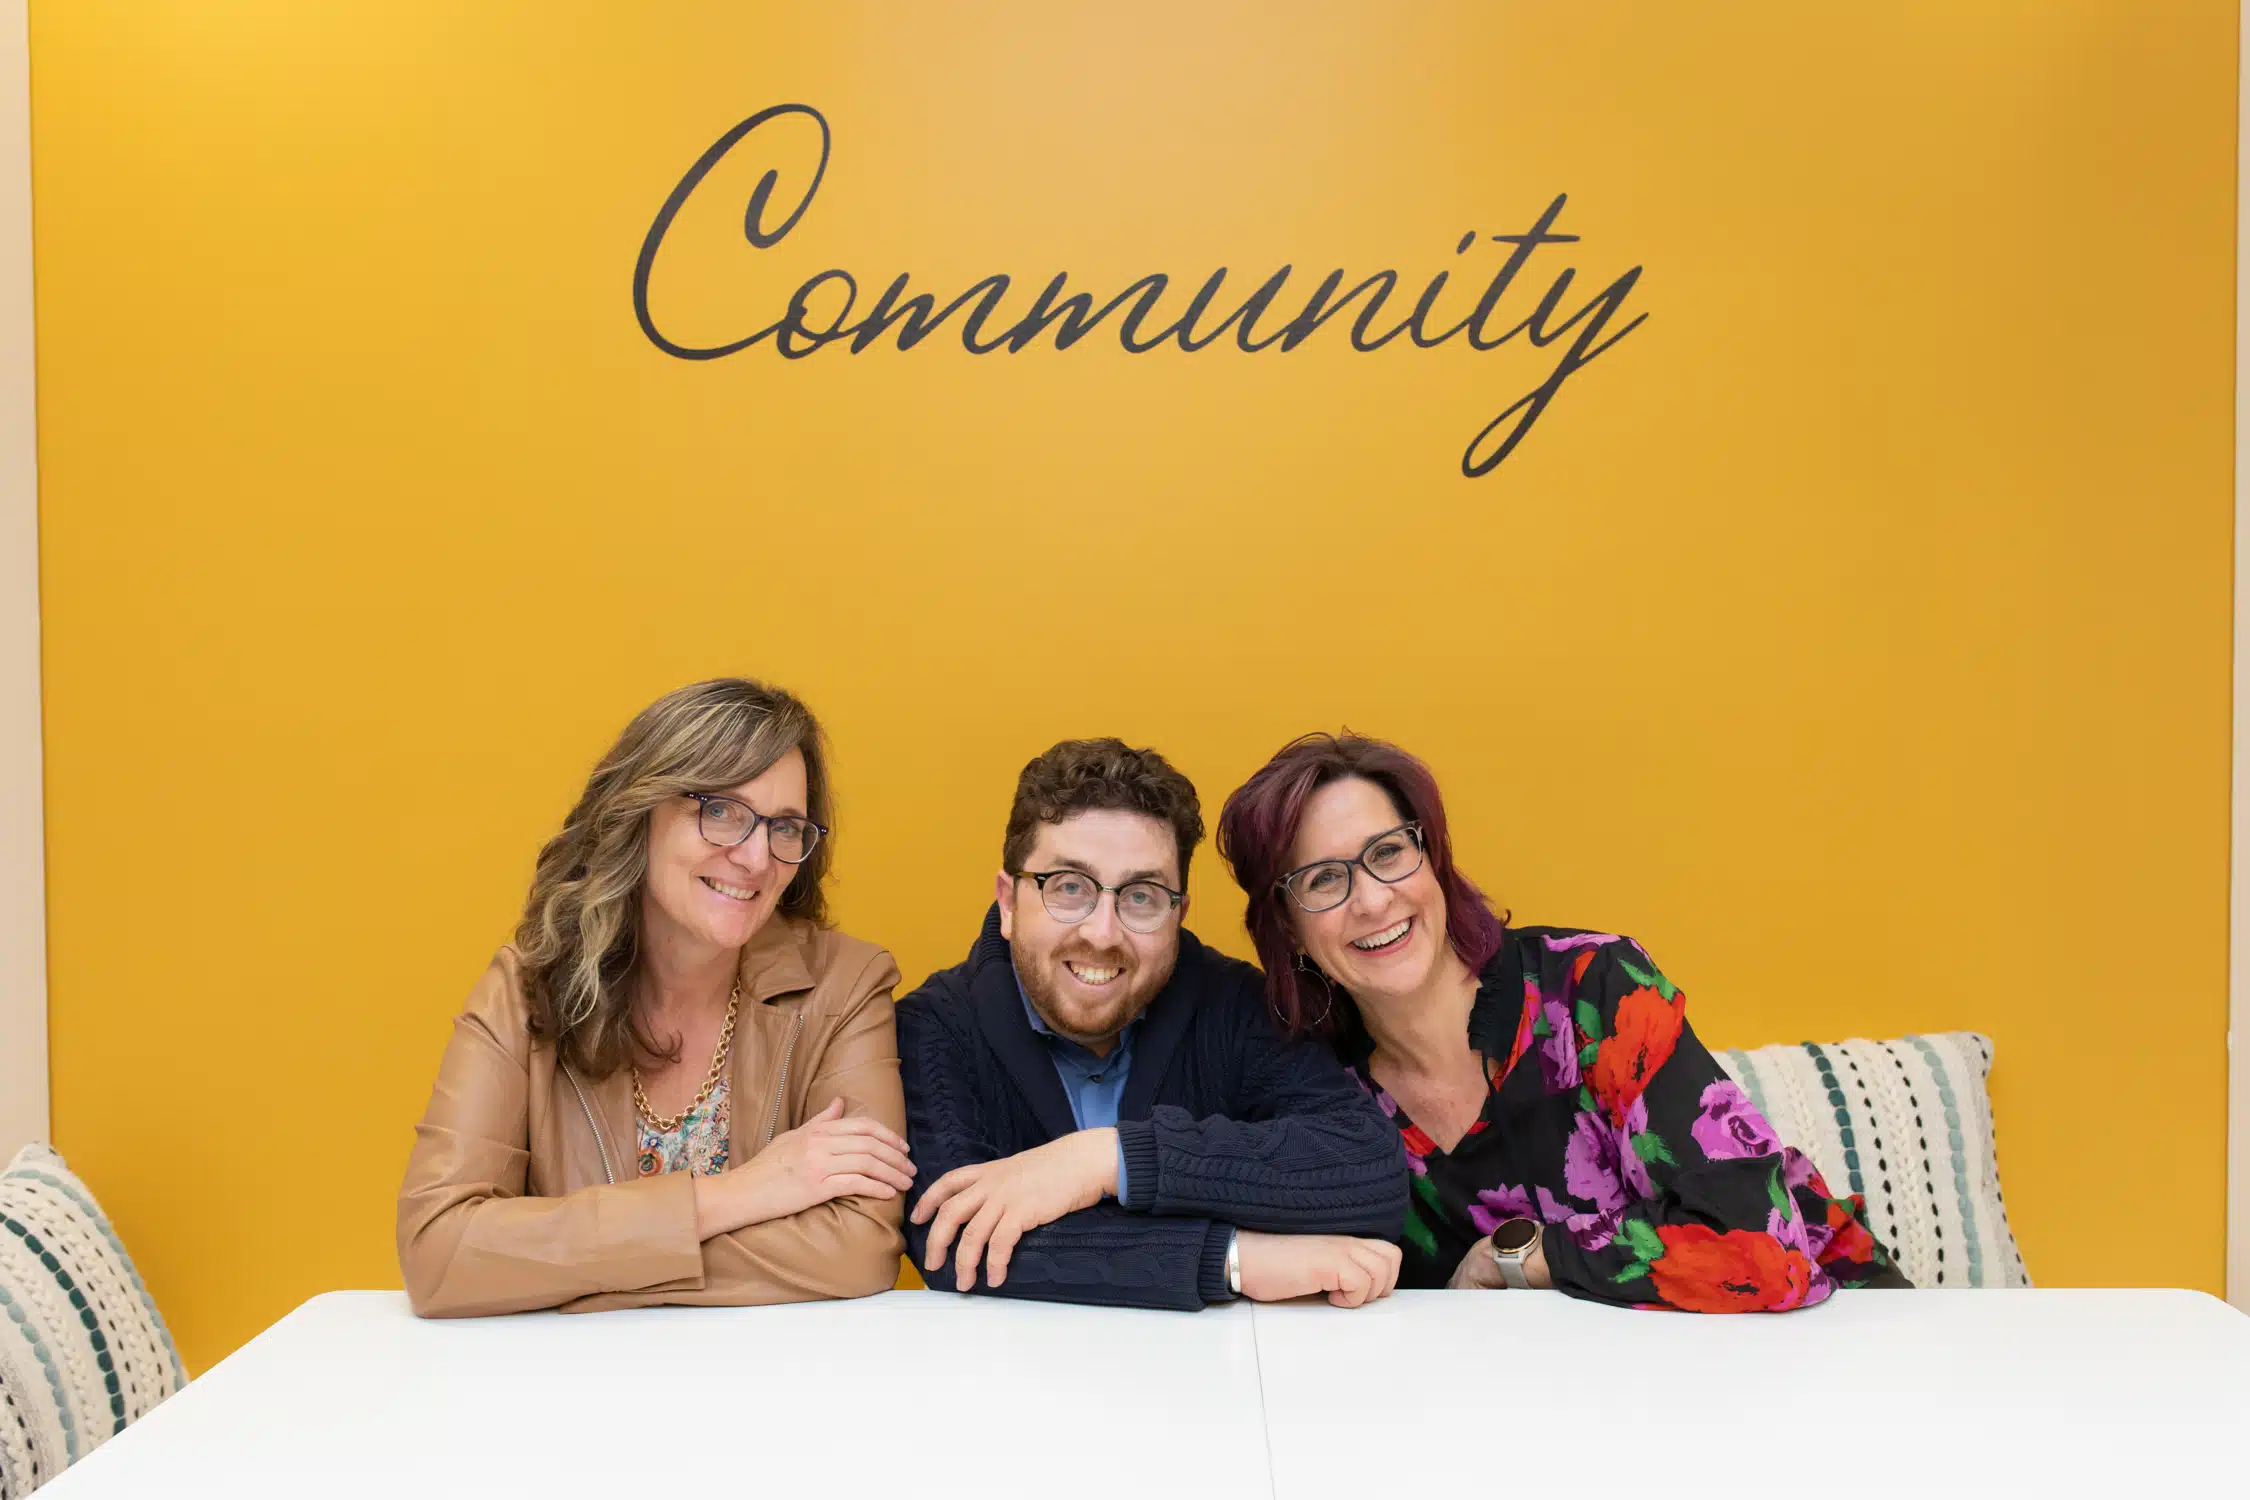 Charlotte Kirby, Founder, with Mitch Reiss and Monica Hecht, Community Managers, at The Village Hive Coworking (photo taken from Toronto Sun)